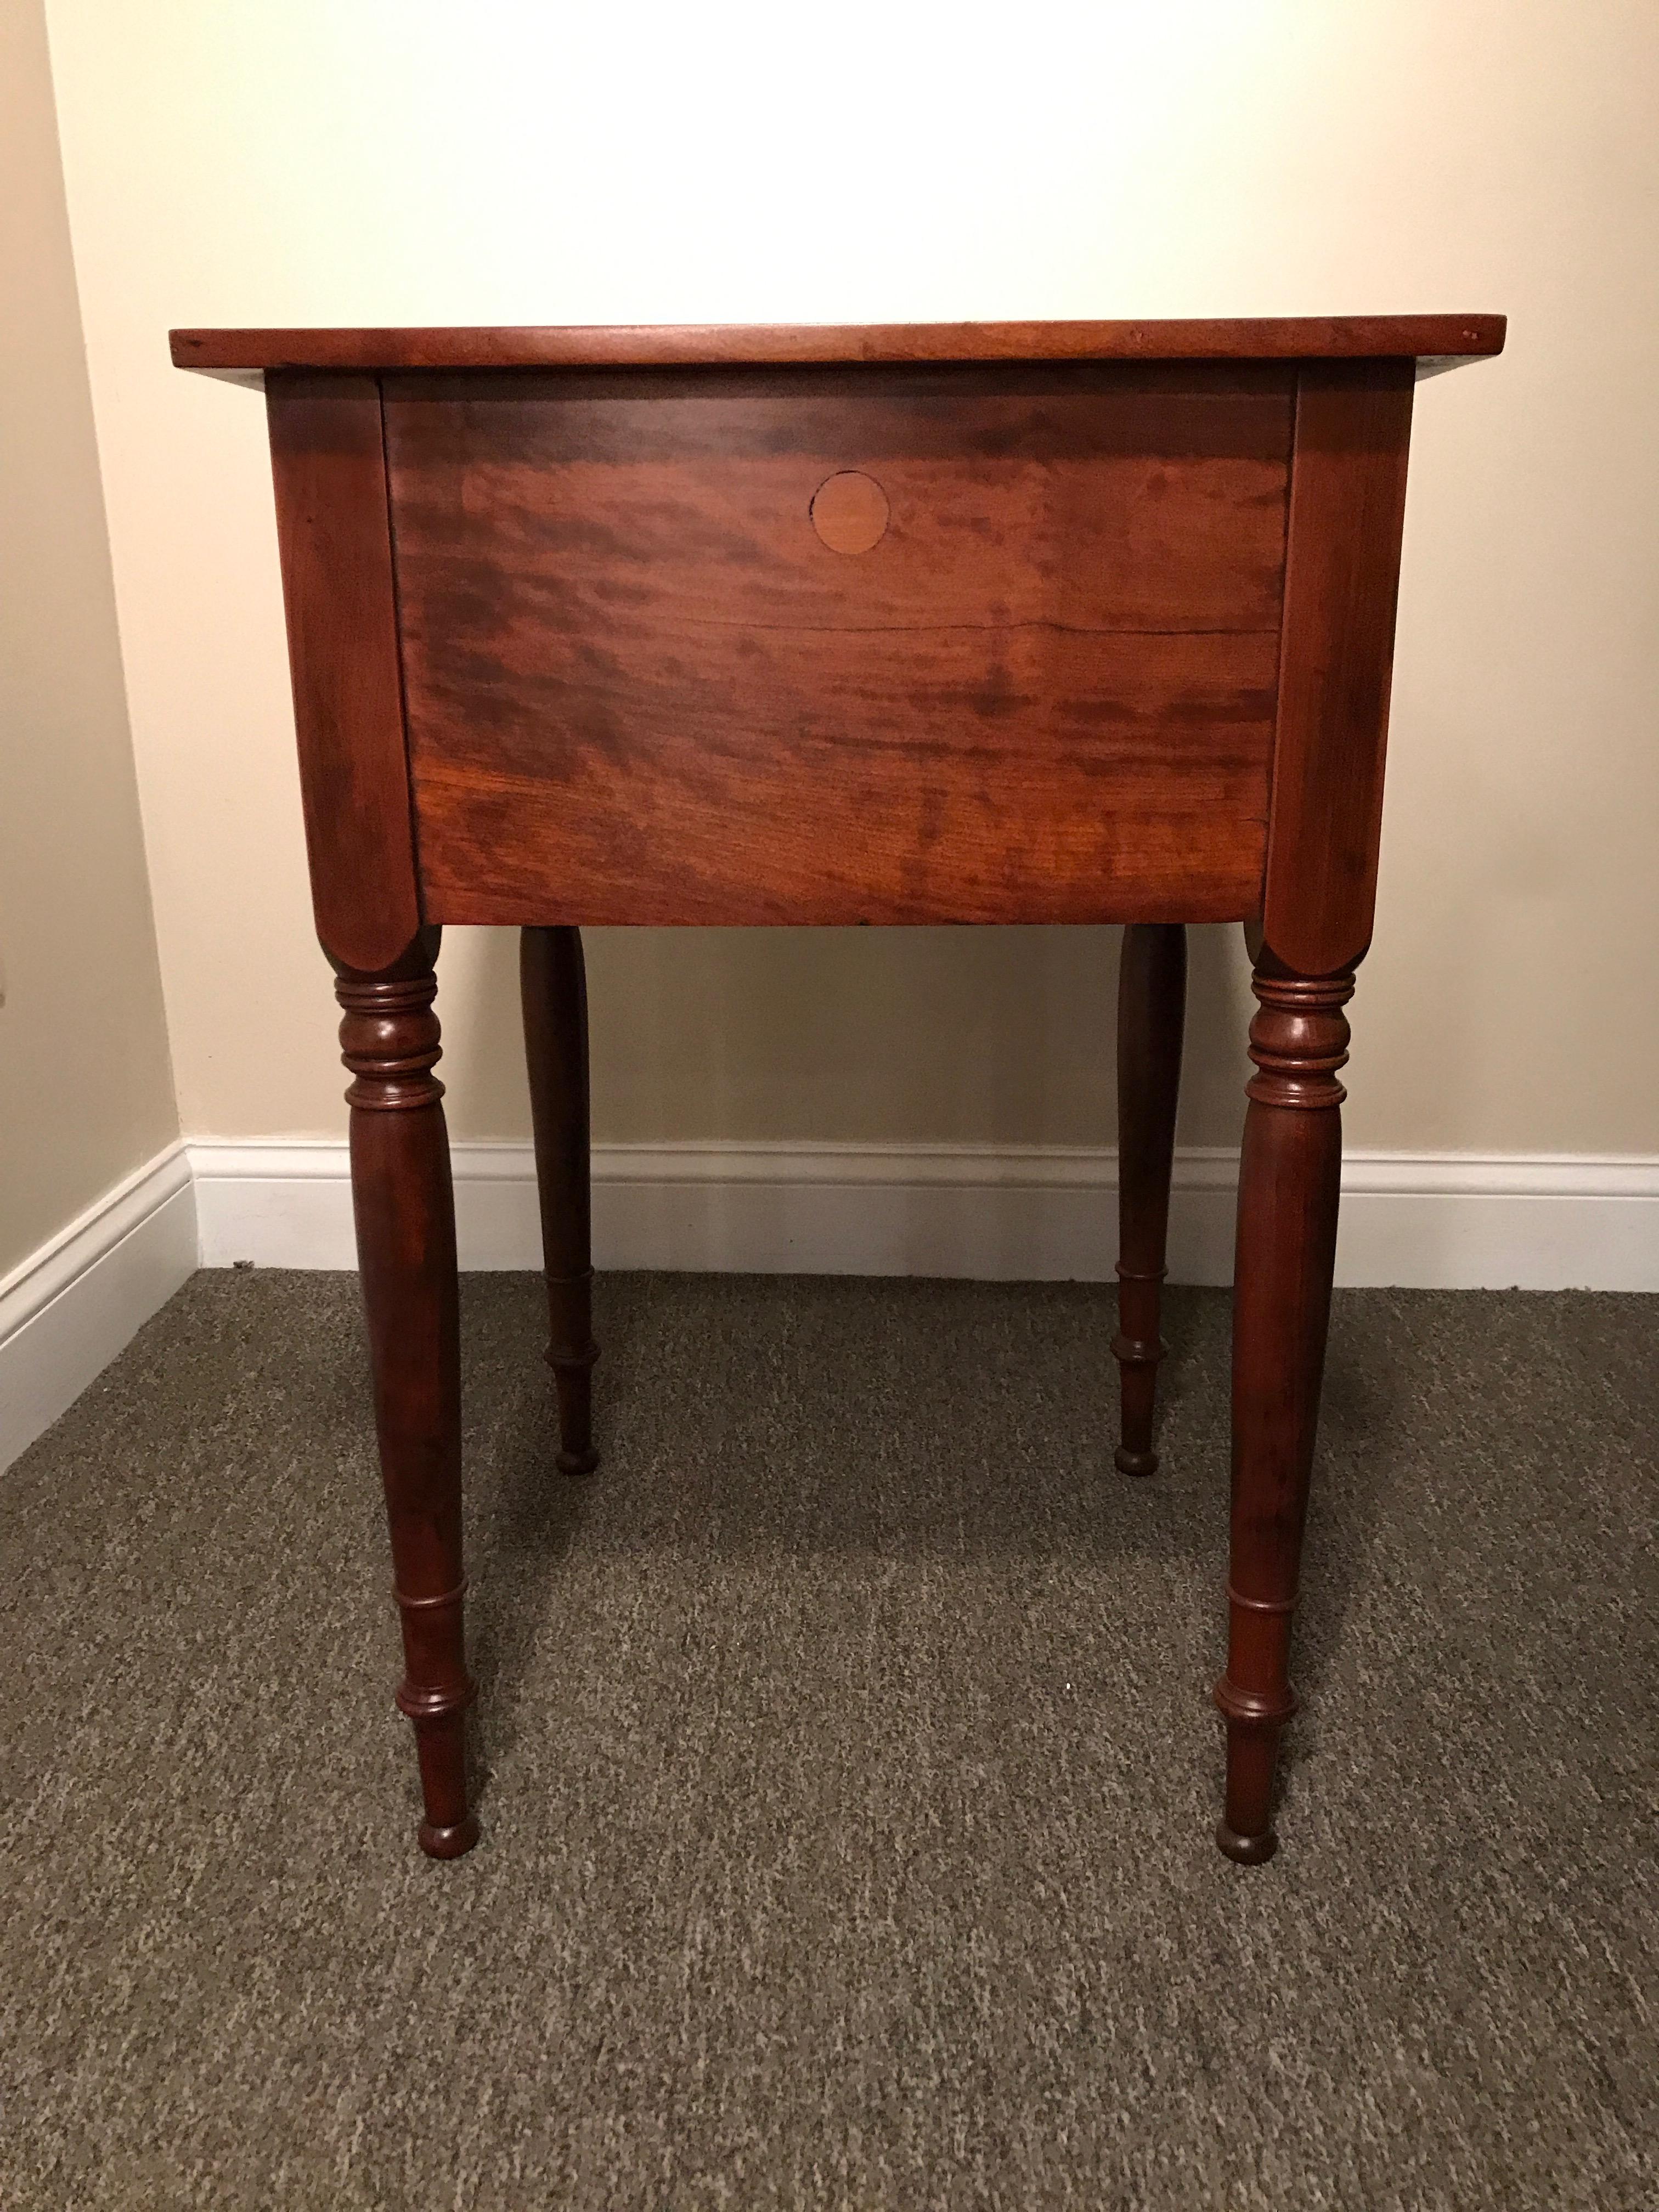 Turned Sheraton 2-Drawer Stand in Cherry, circa 1820 North Shore, Massachusetts For Sale